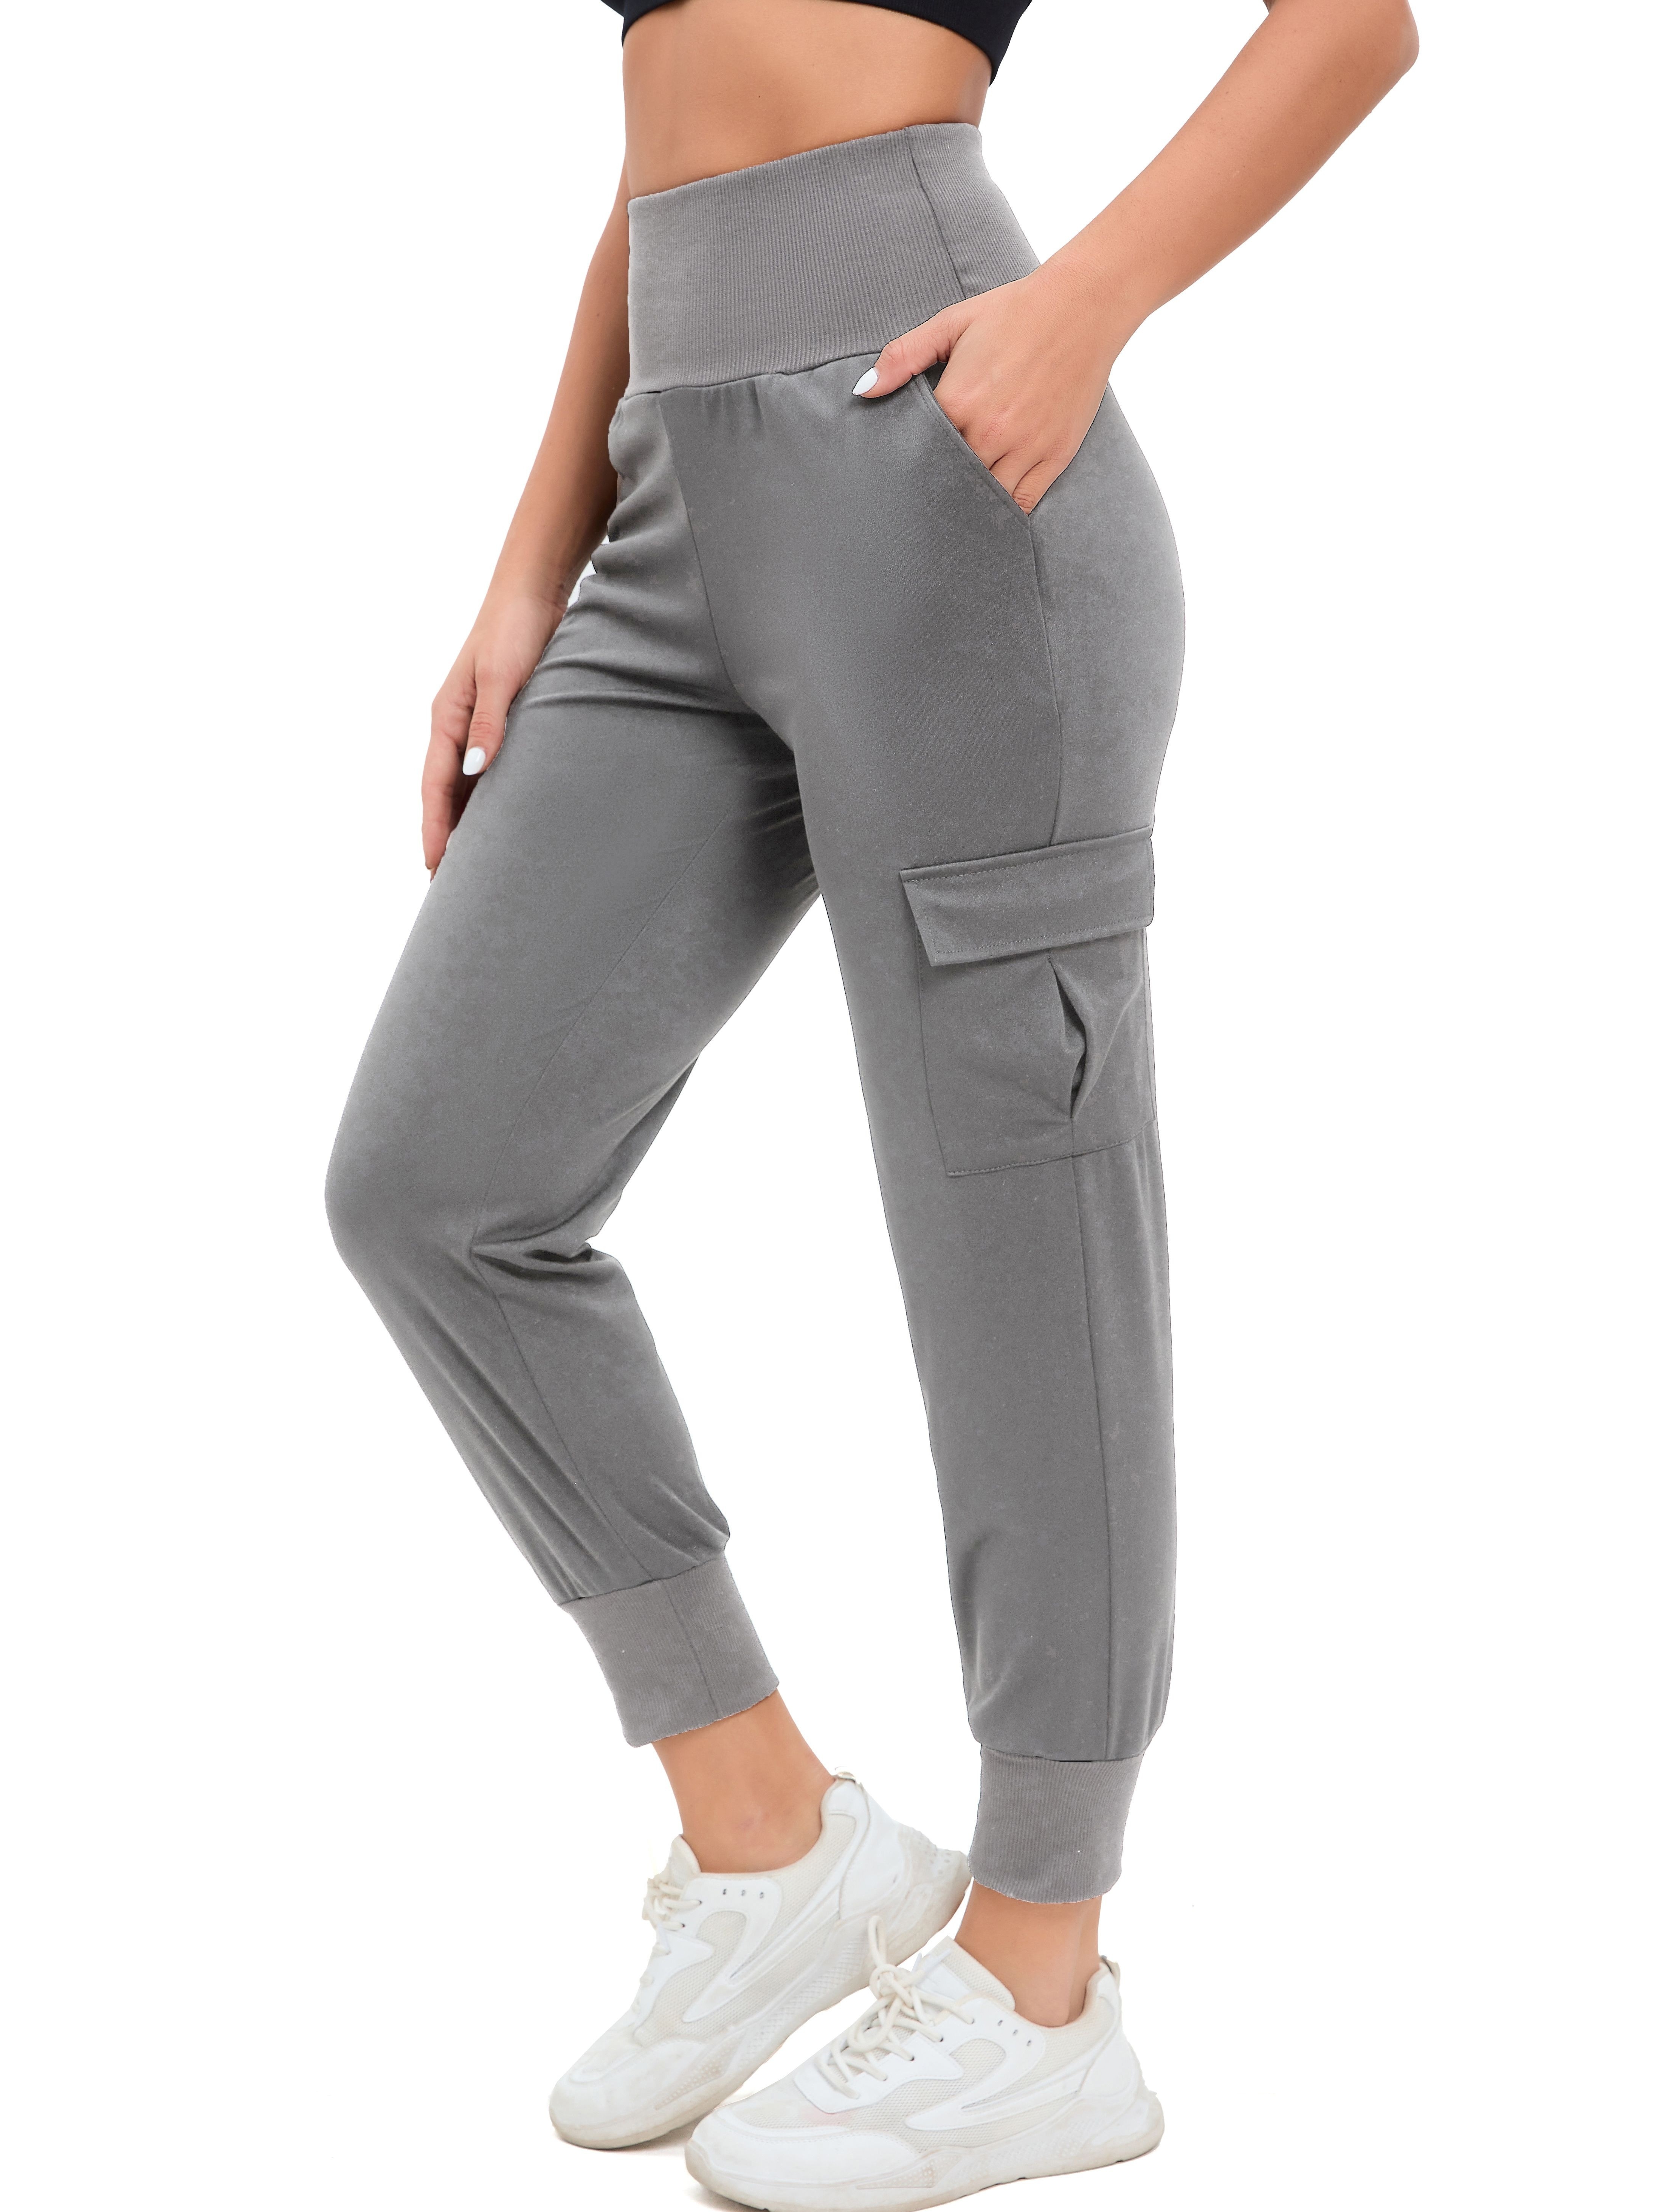 Gray Sweatpants Women Casual Track Pants Jogger High Waisted